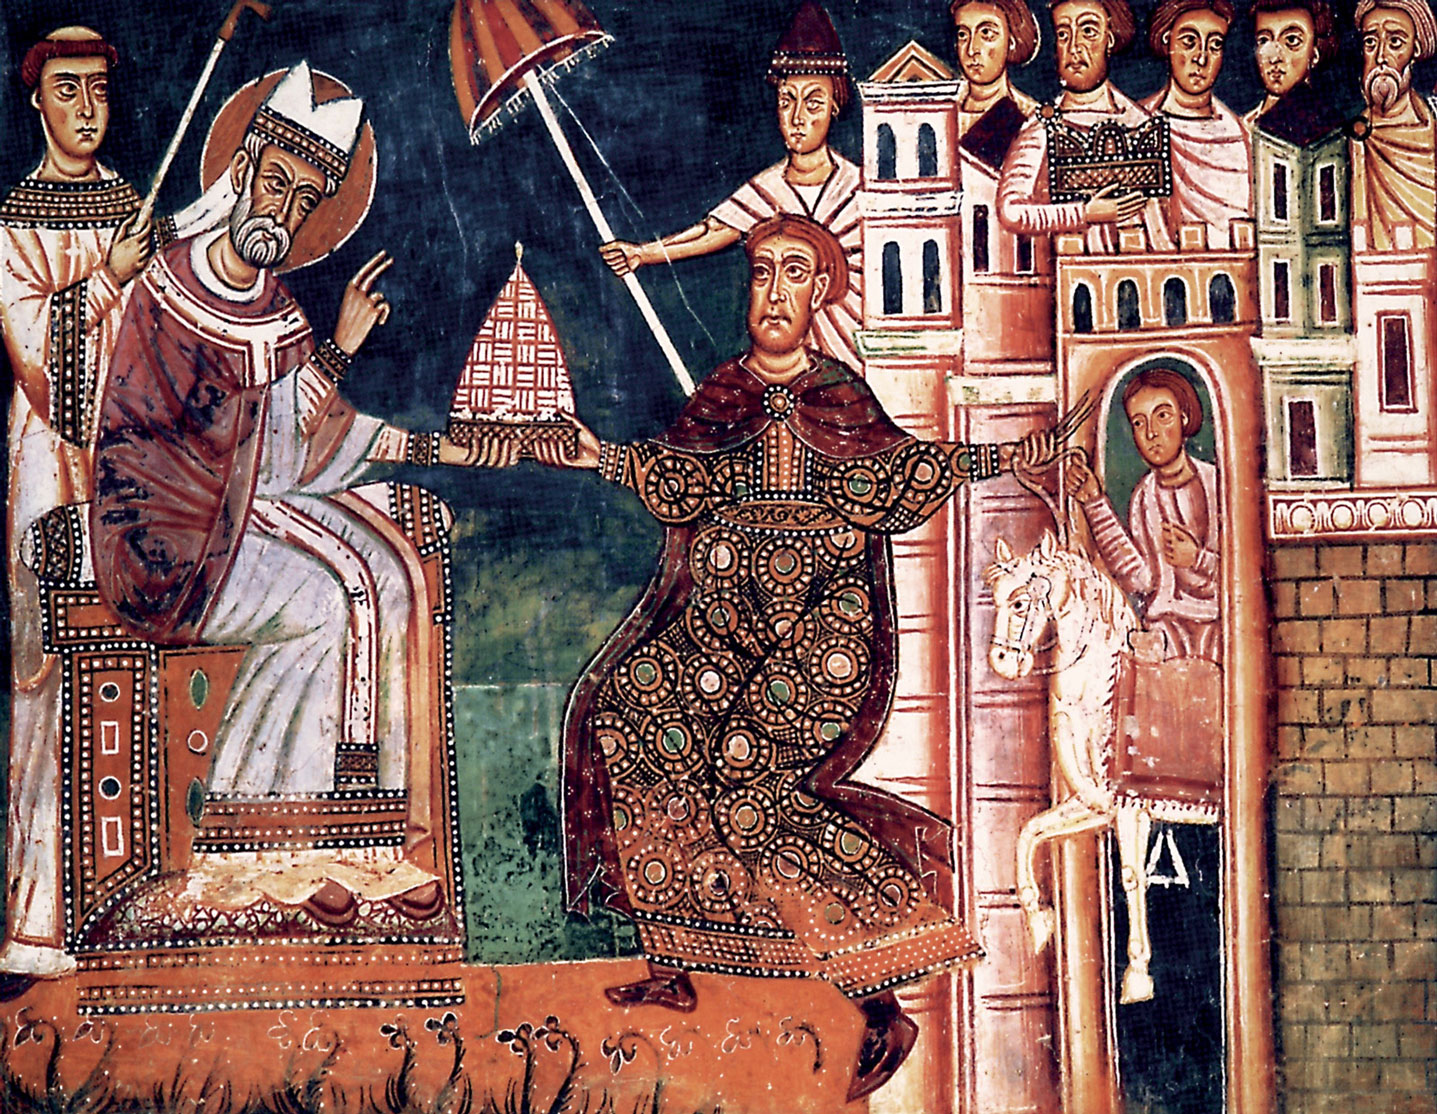  A scene from the thirteenth-century fresco cycle of the Donation of Constantine. The fresco is in the basilica of the Quattro Santi Coronati in Rome.